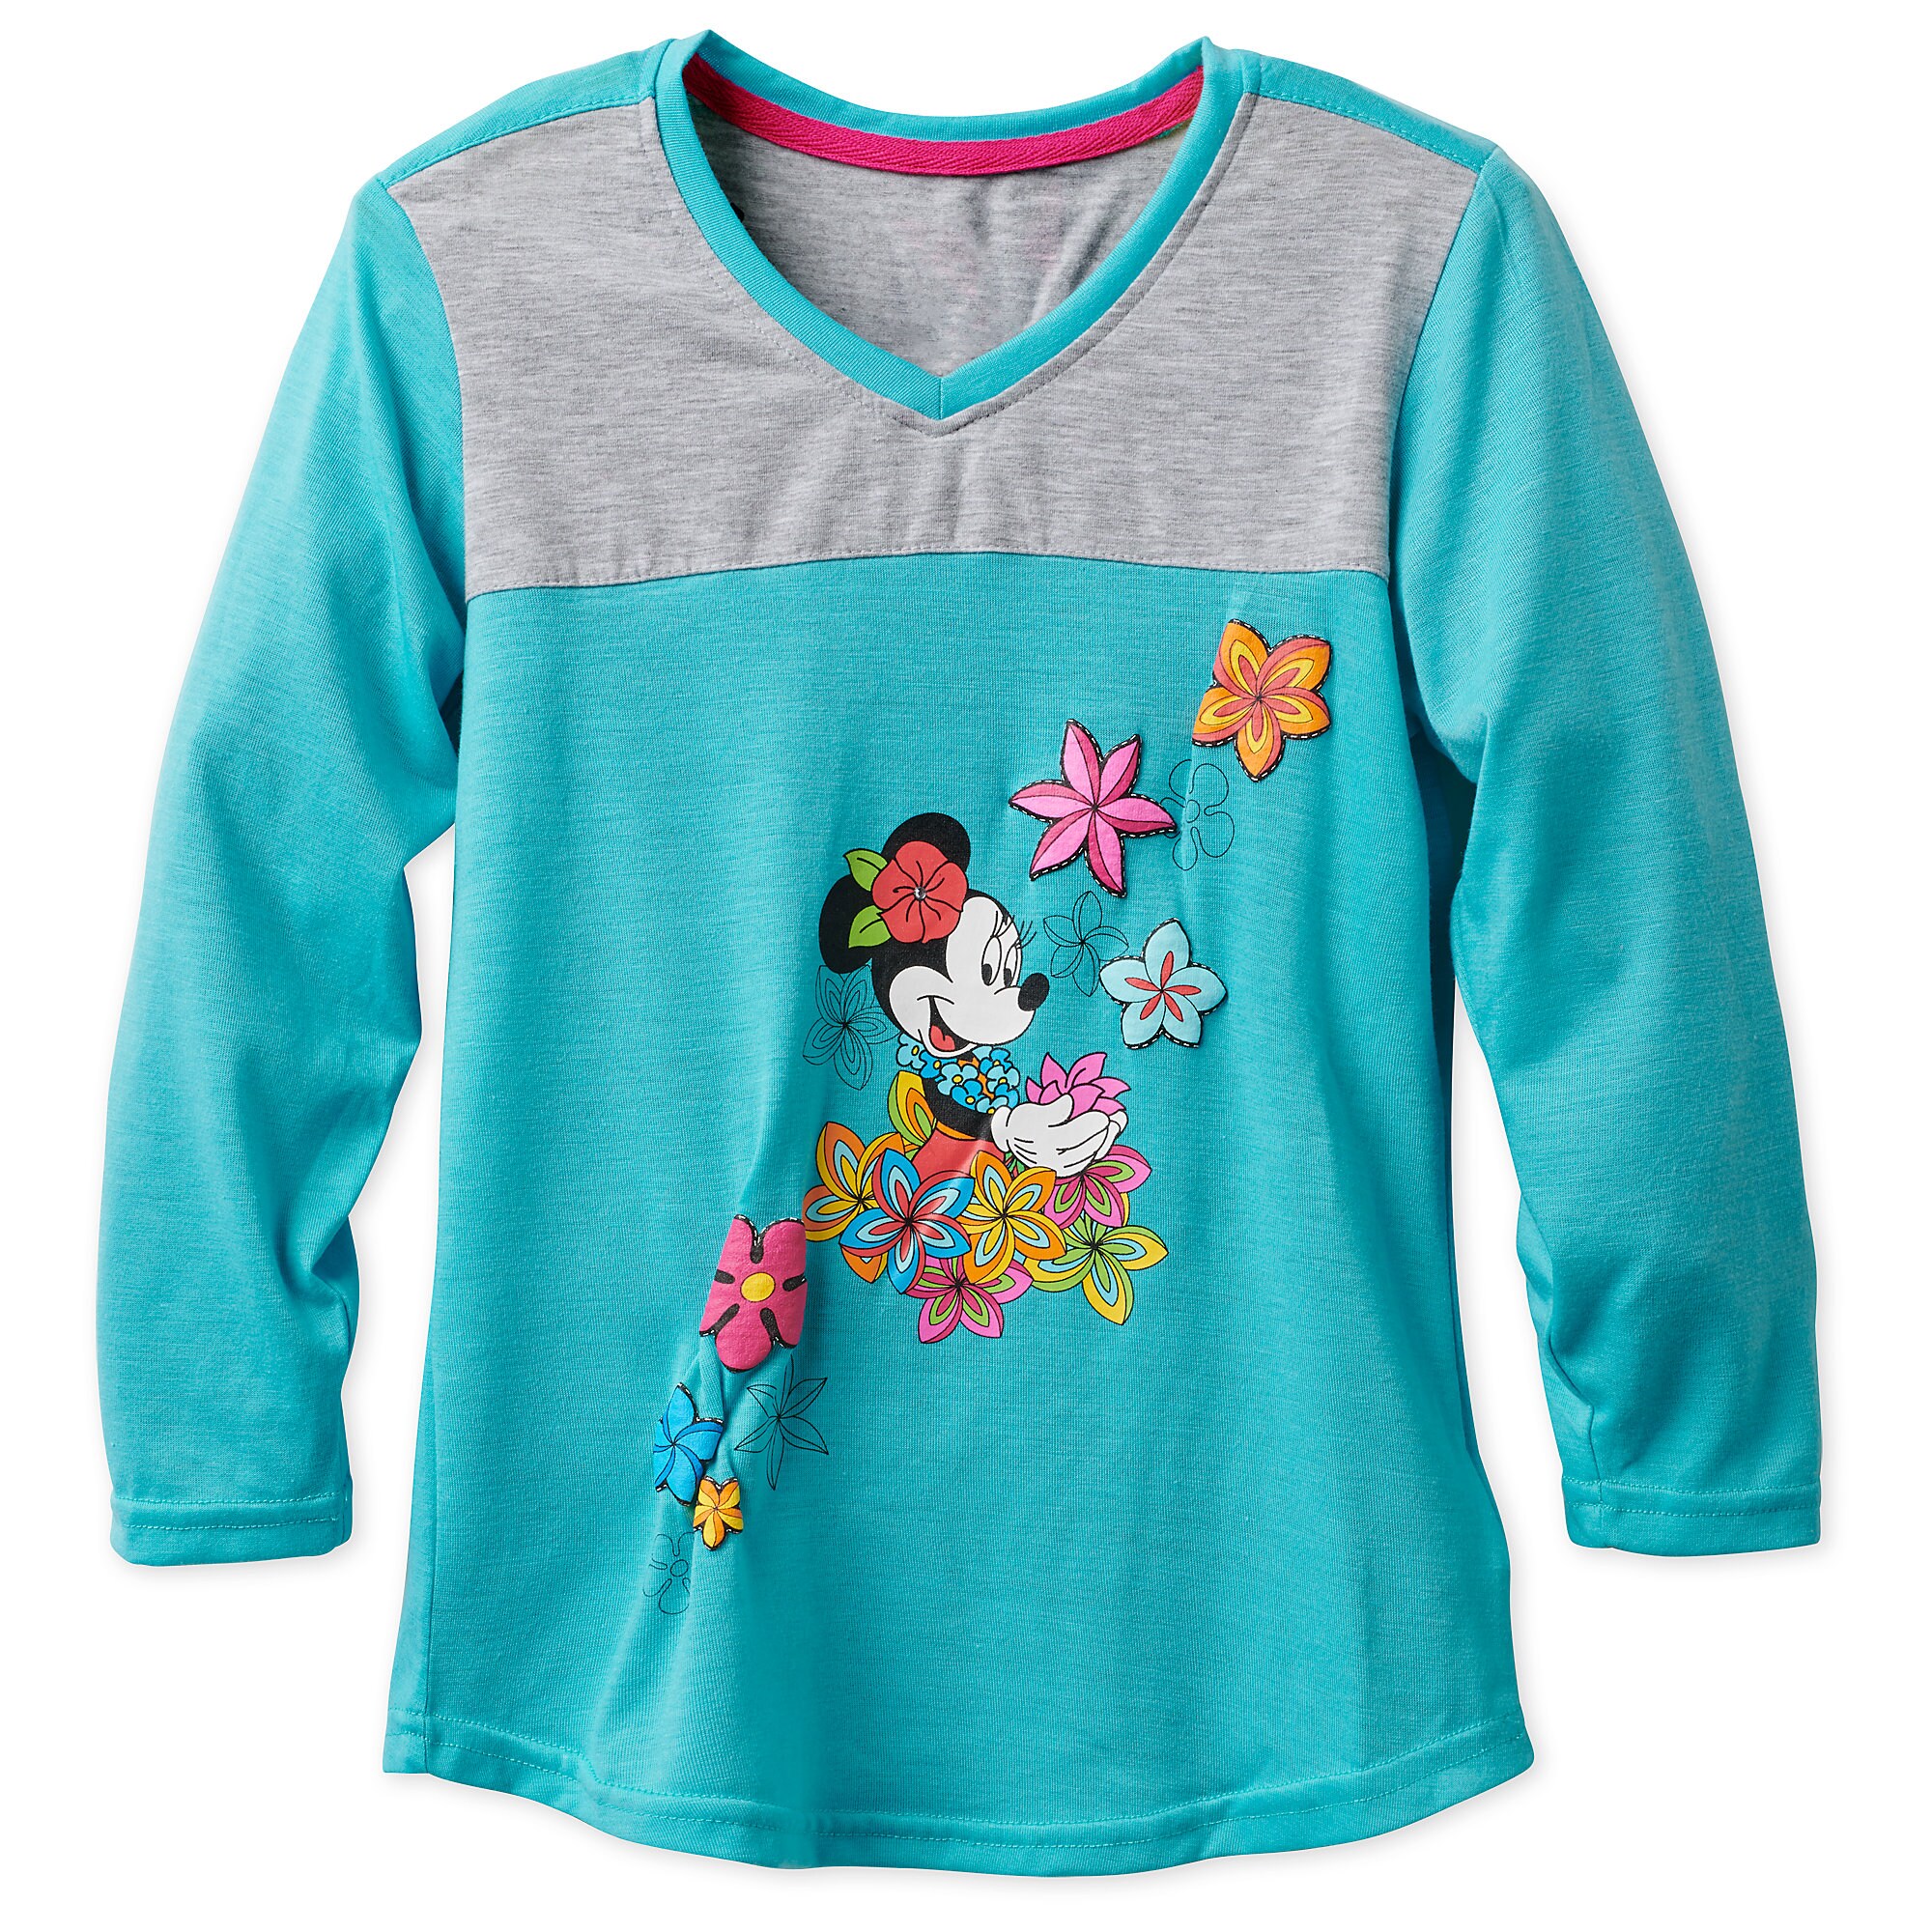 Minnie Mouse Long Sleeve T-Shirt for Girls - Aulani, A Disney Resort & Spa